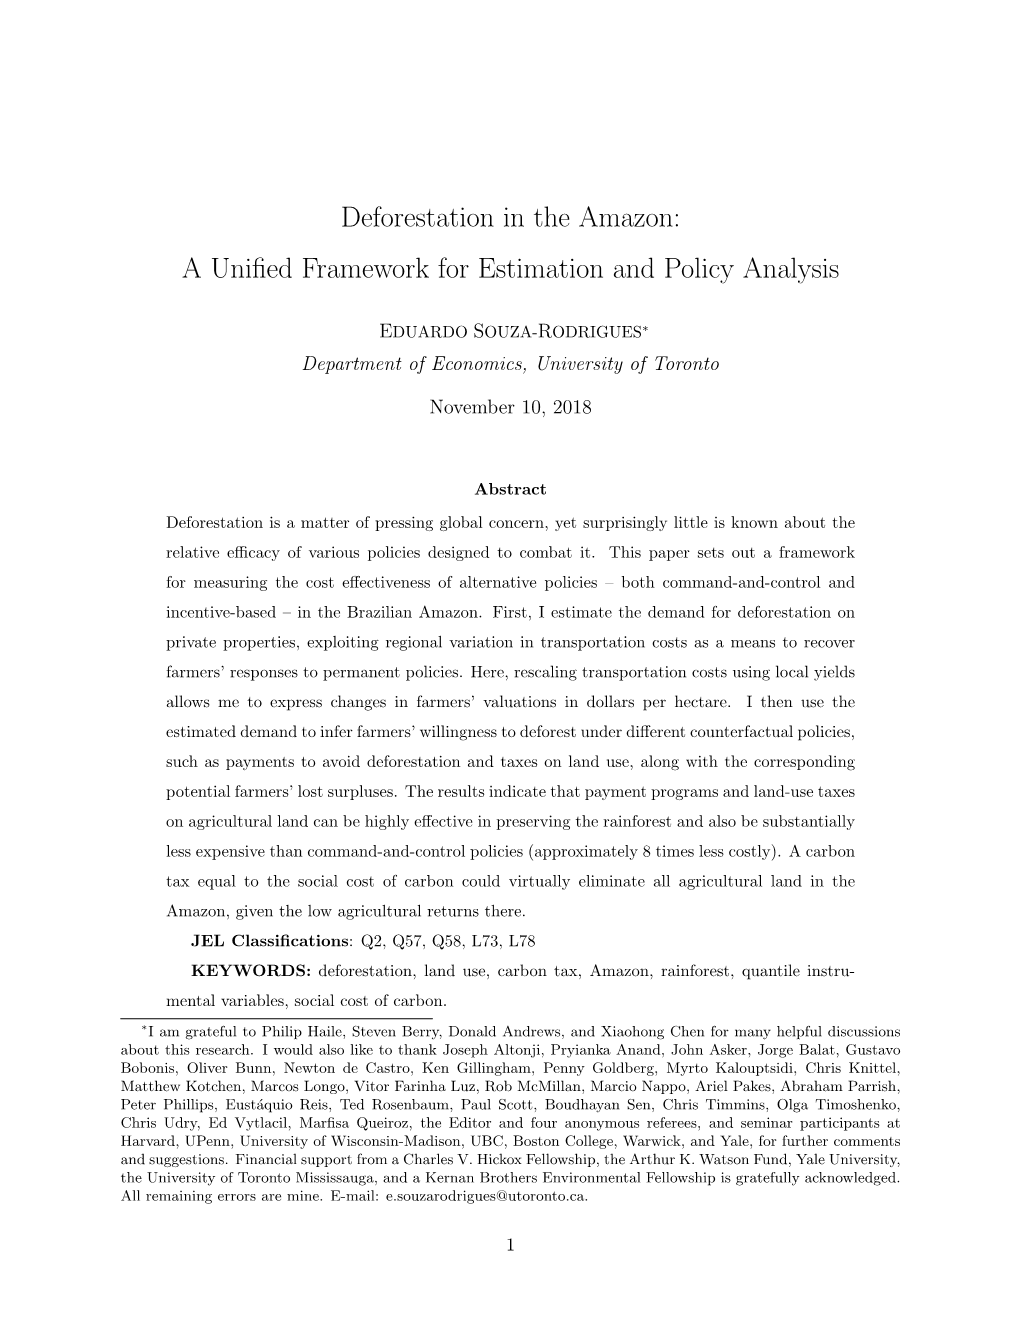 Deforestation in the Amazon: a Unified Framework for Estimation